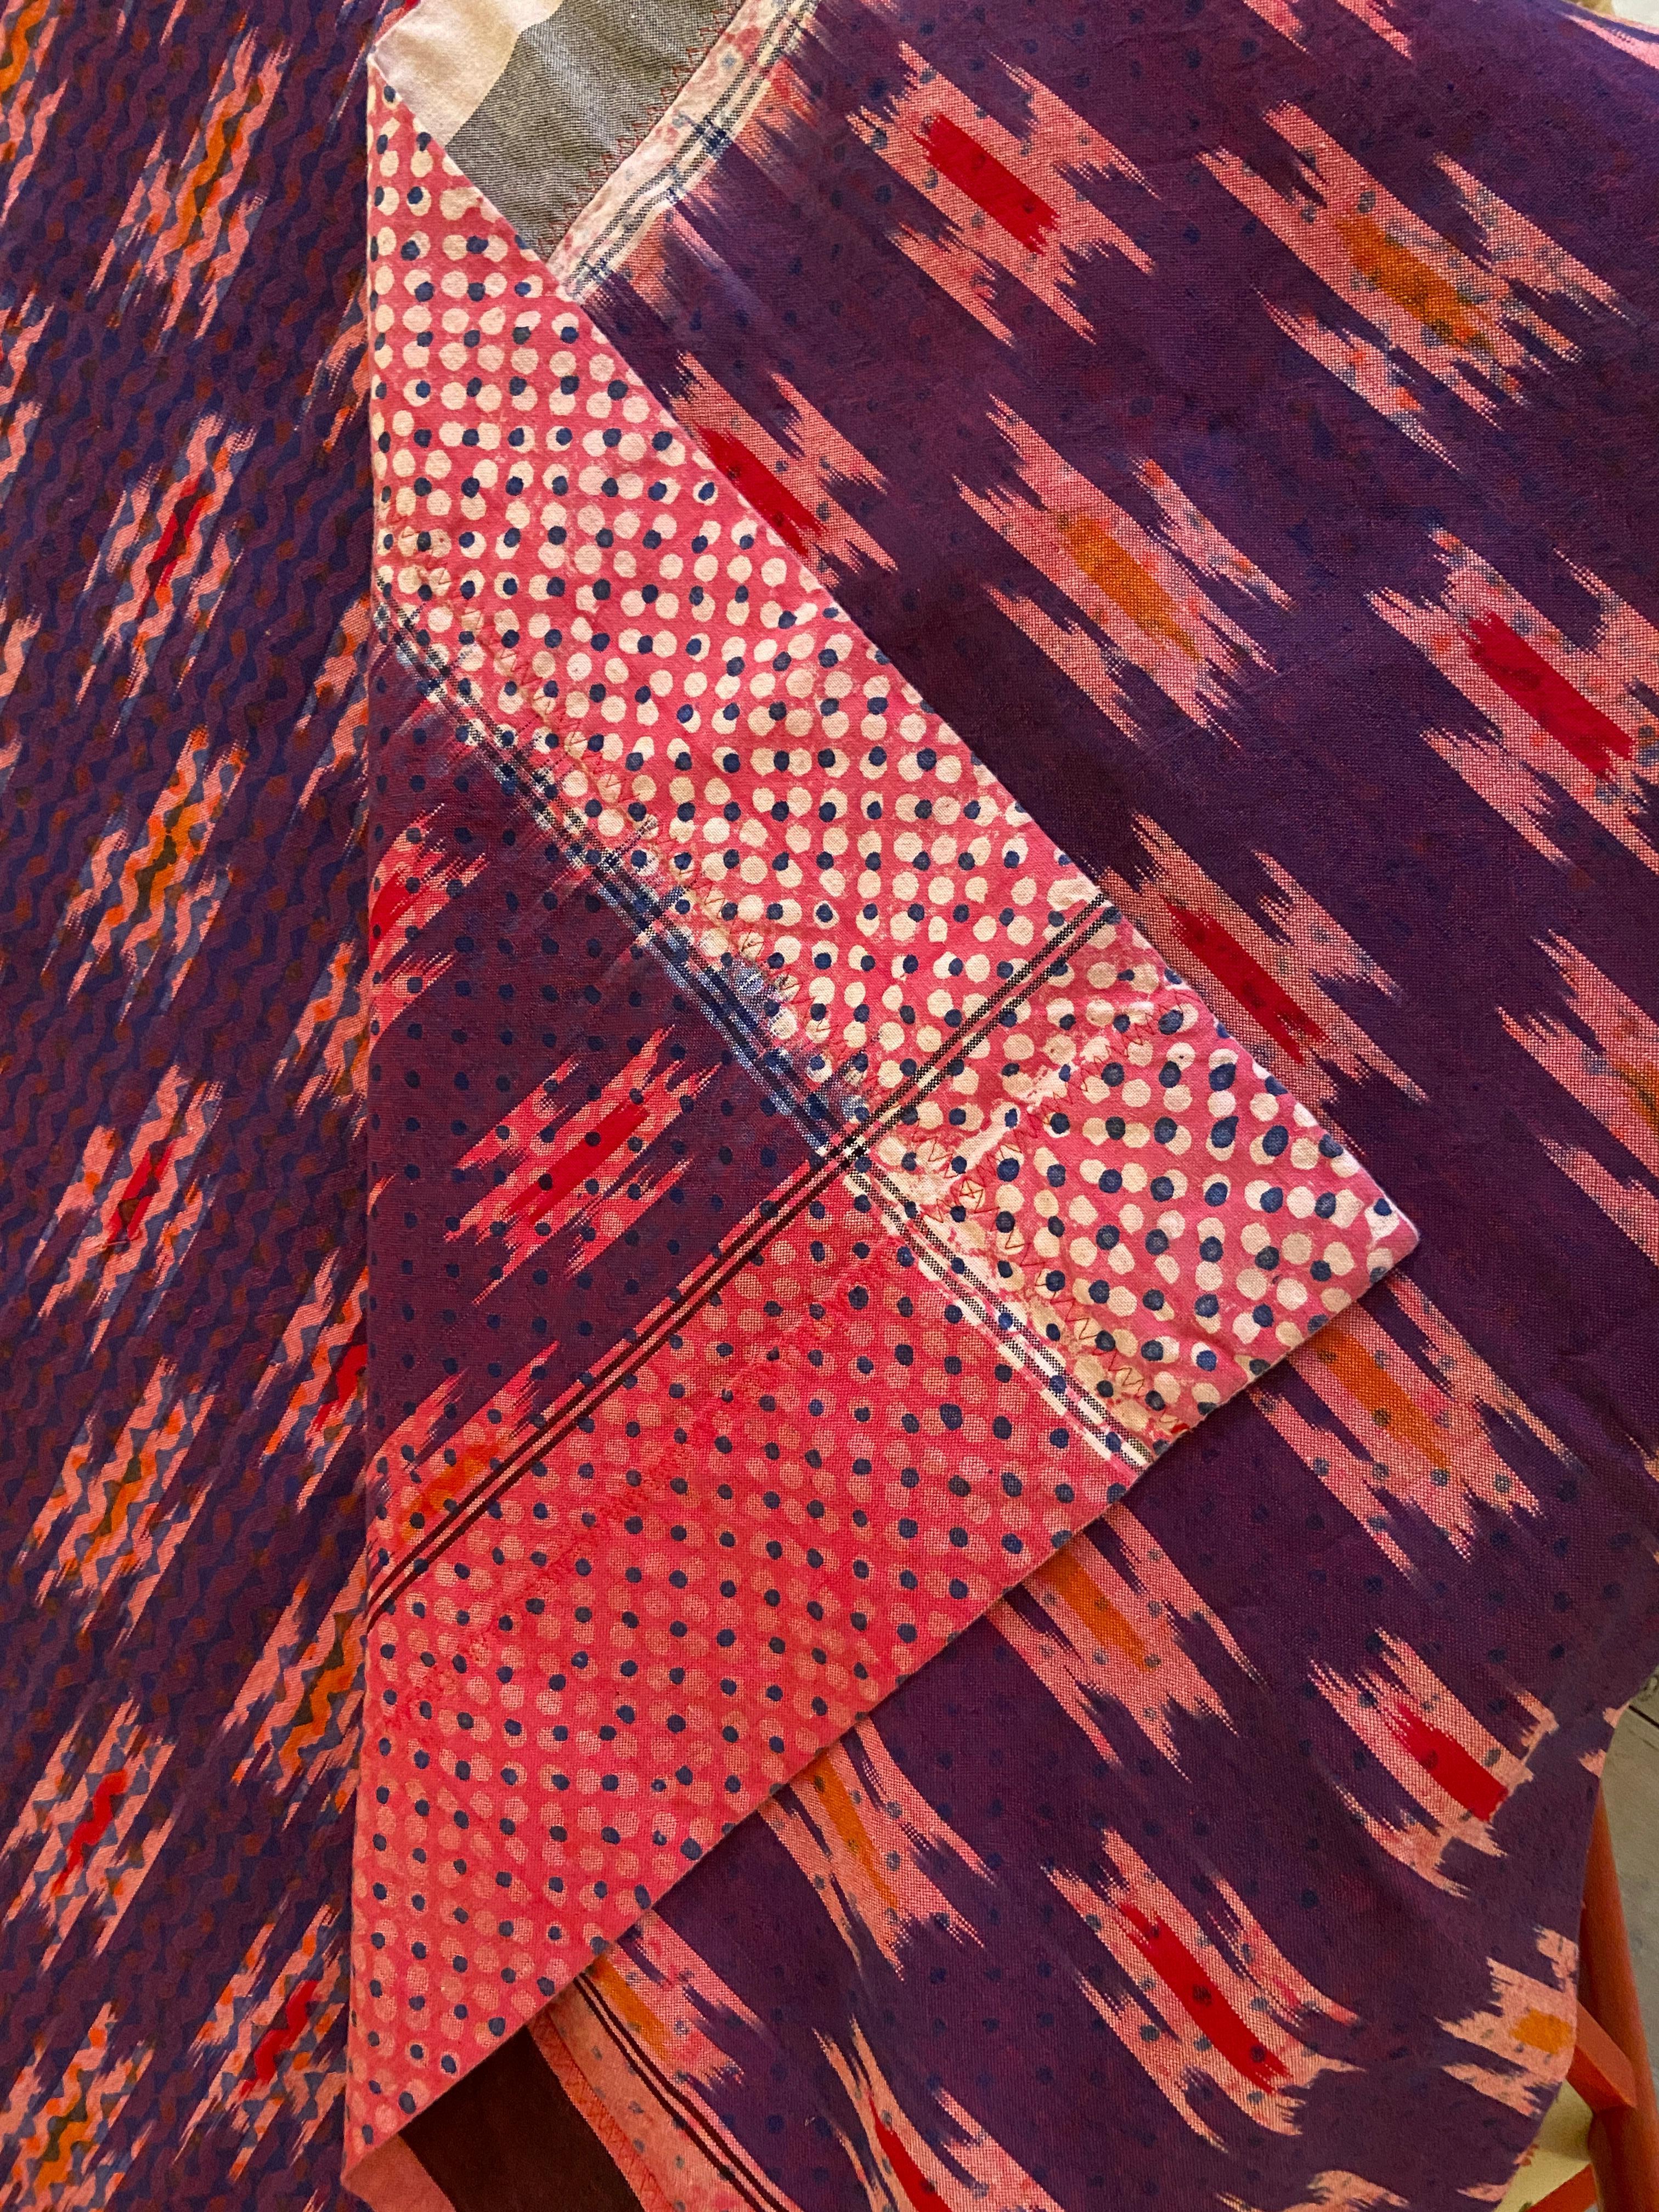 Textile Contemporary Gregory Parkinson Tablecloth Purple Pink Ikat Hand-Blocked Patterns